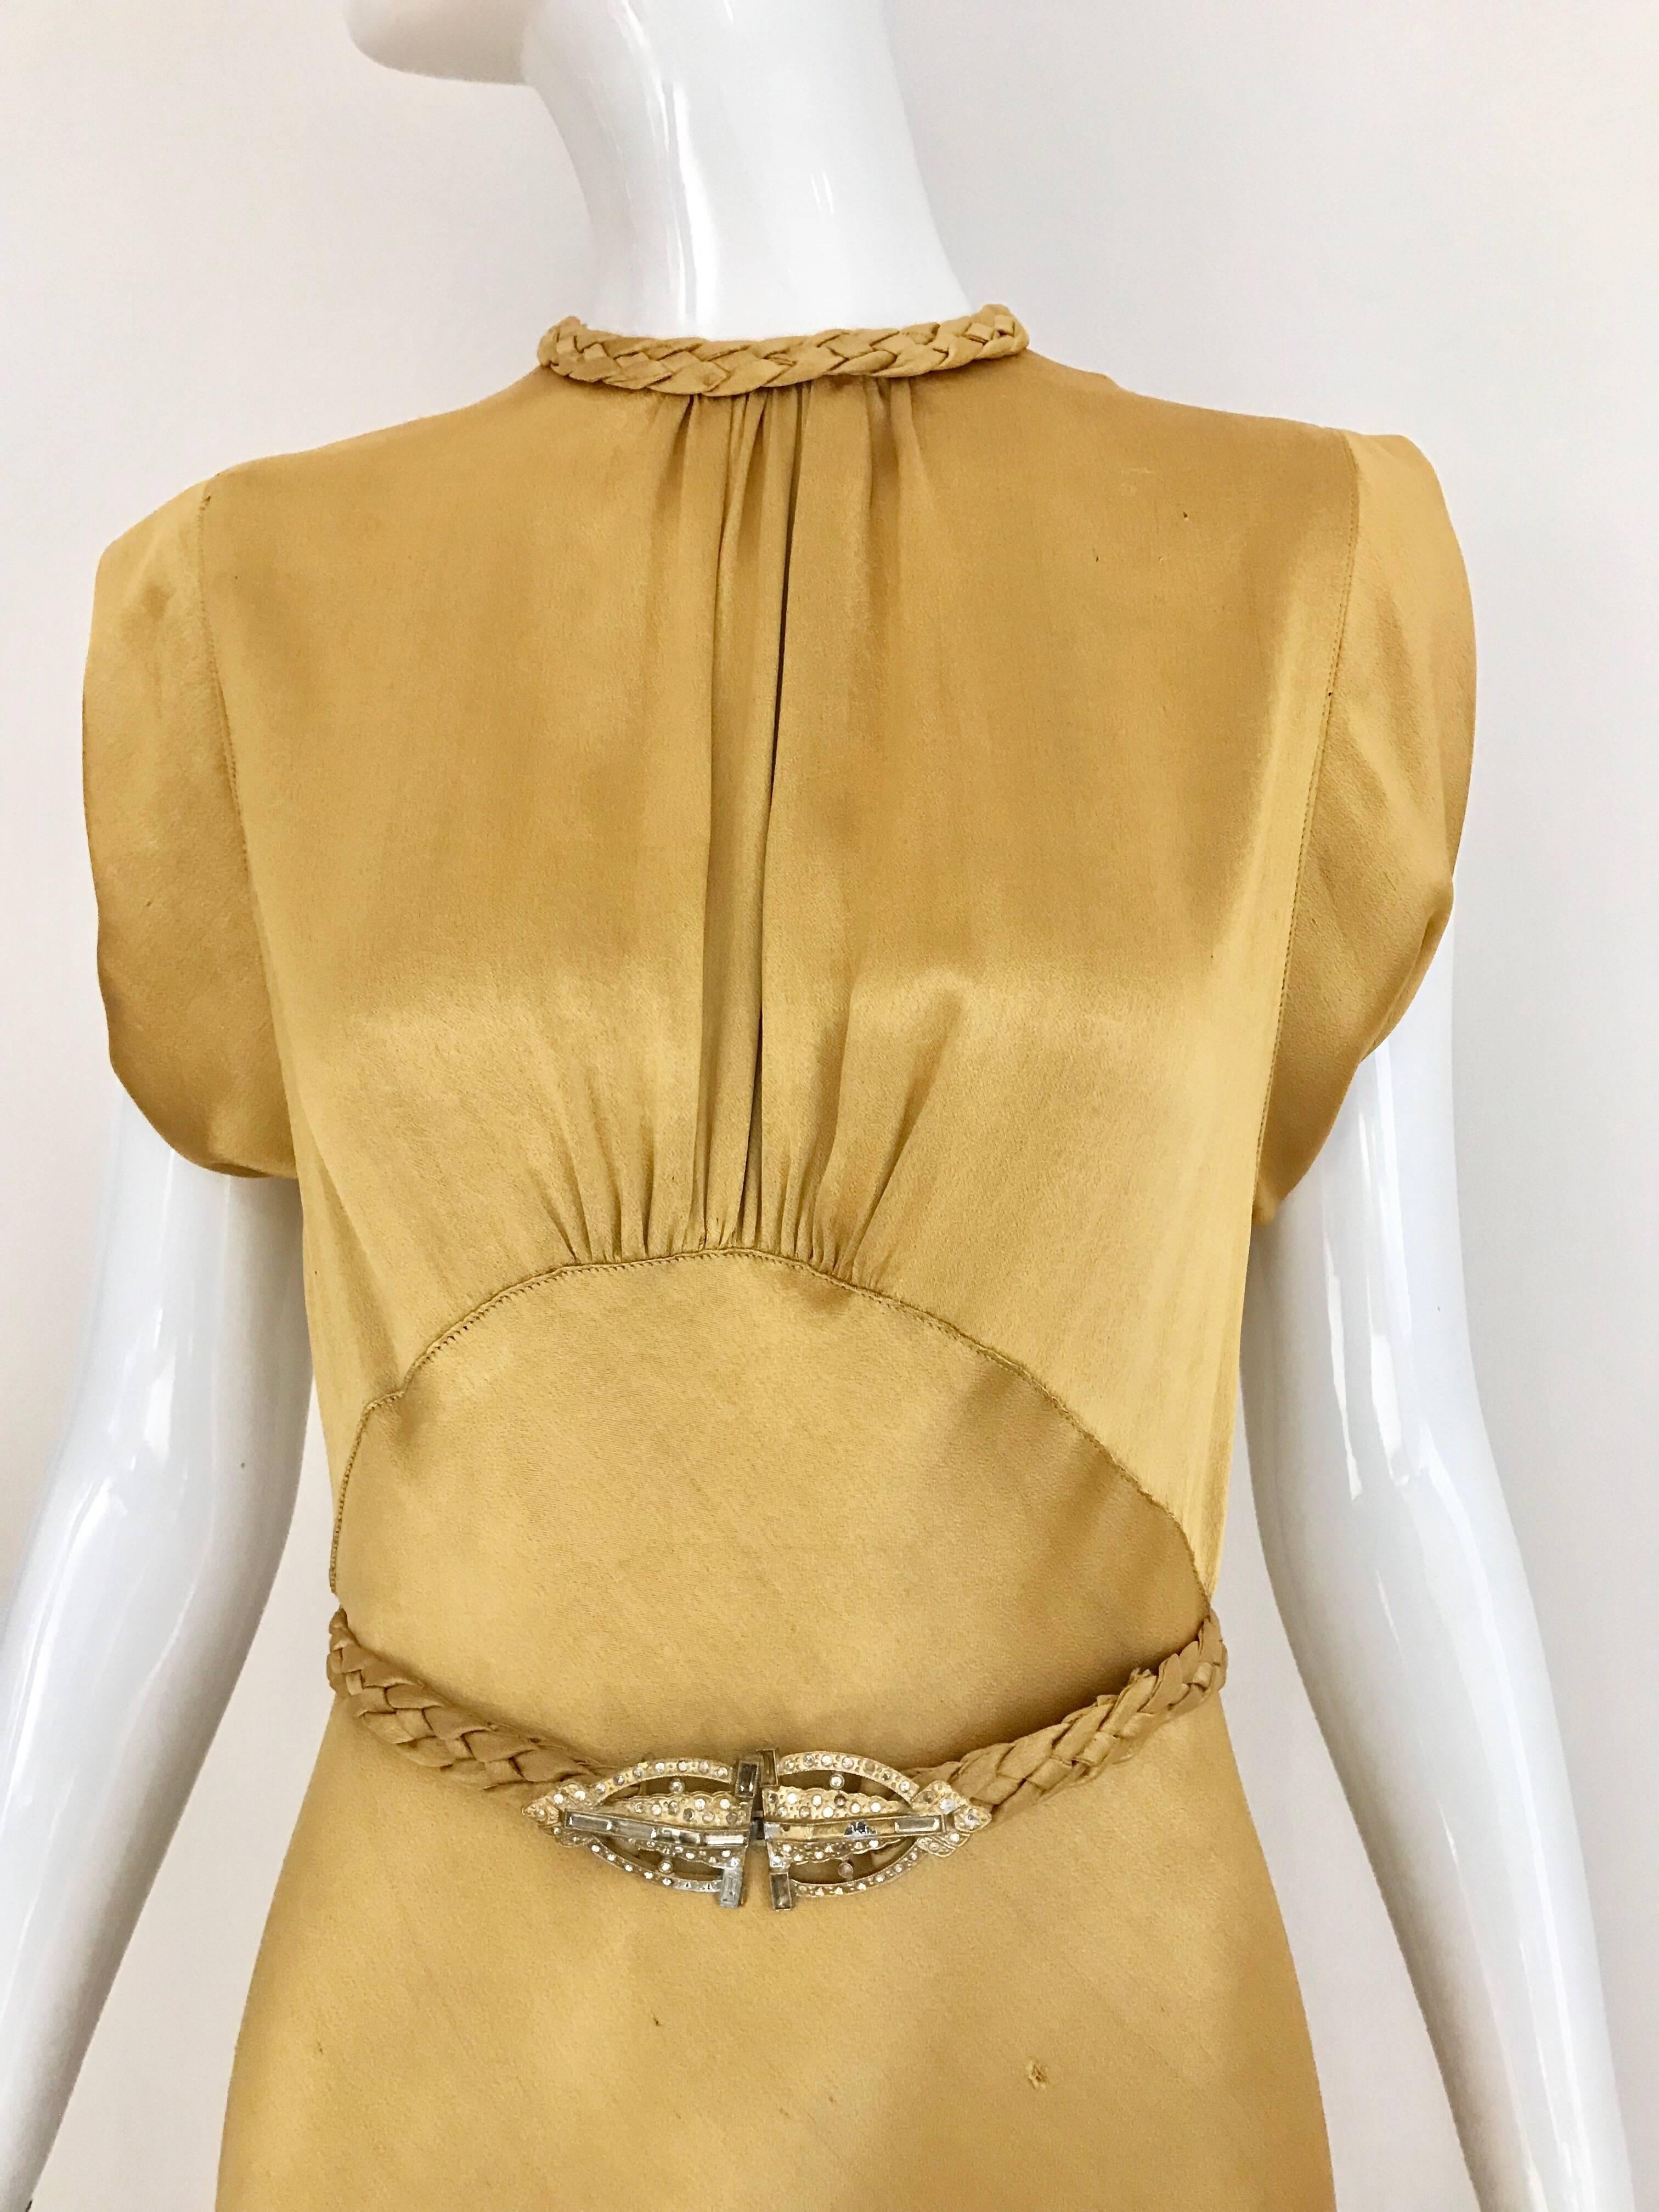 Elegant 1930s Old Hollywood Glamour Gold Satin Gown with Belt. Gown have some tiny holes ( see picture attached) 
Size: 4
Measurement: Bust: 34 inch / Waist: 28 inch/ Length 59 inch
**** This Gown has been professionally Dry Cleaned and Ready to